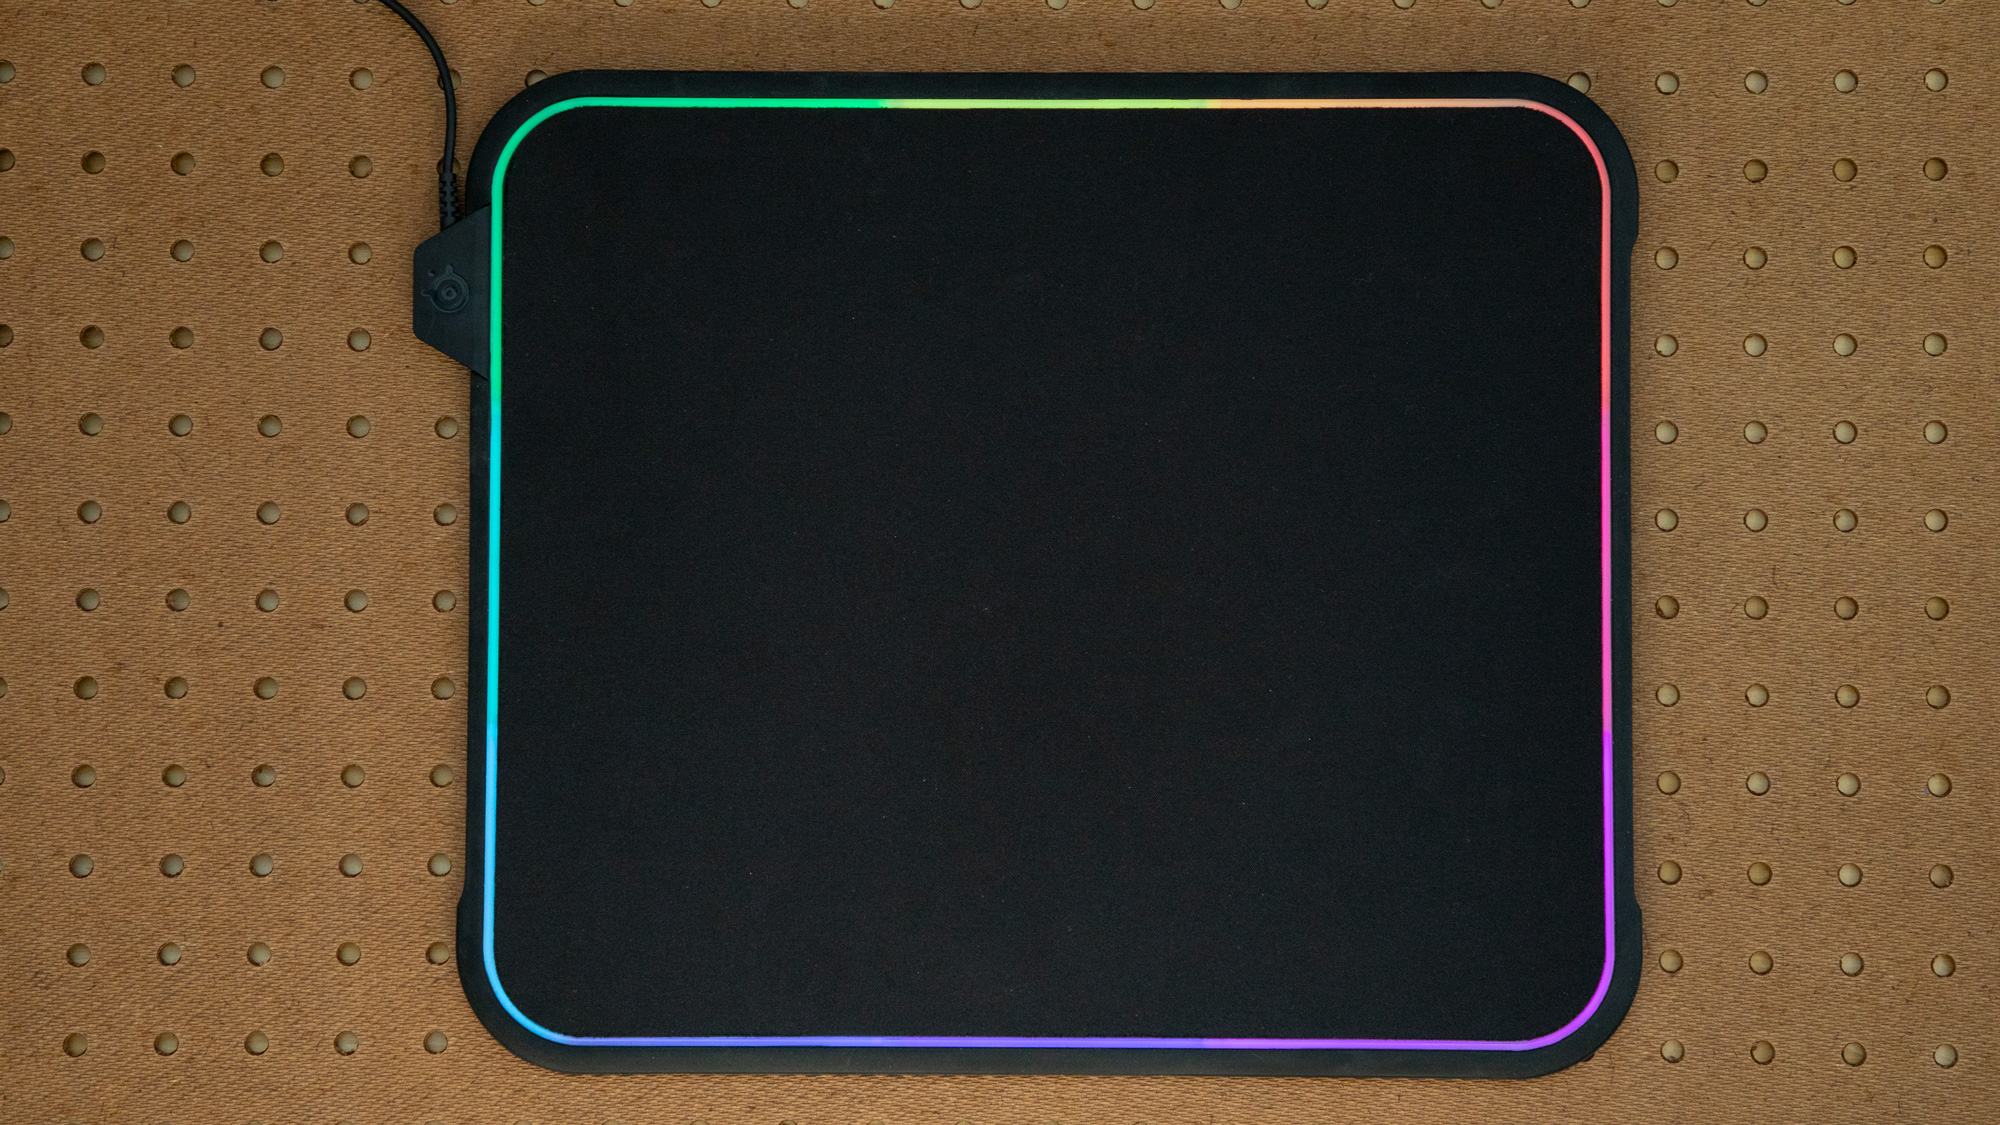 SteelSeries' QCK Prism is the best RGB mouse pad we've tested.